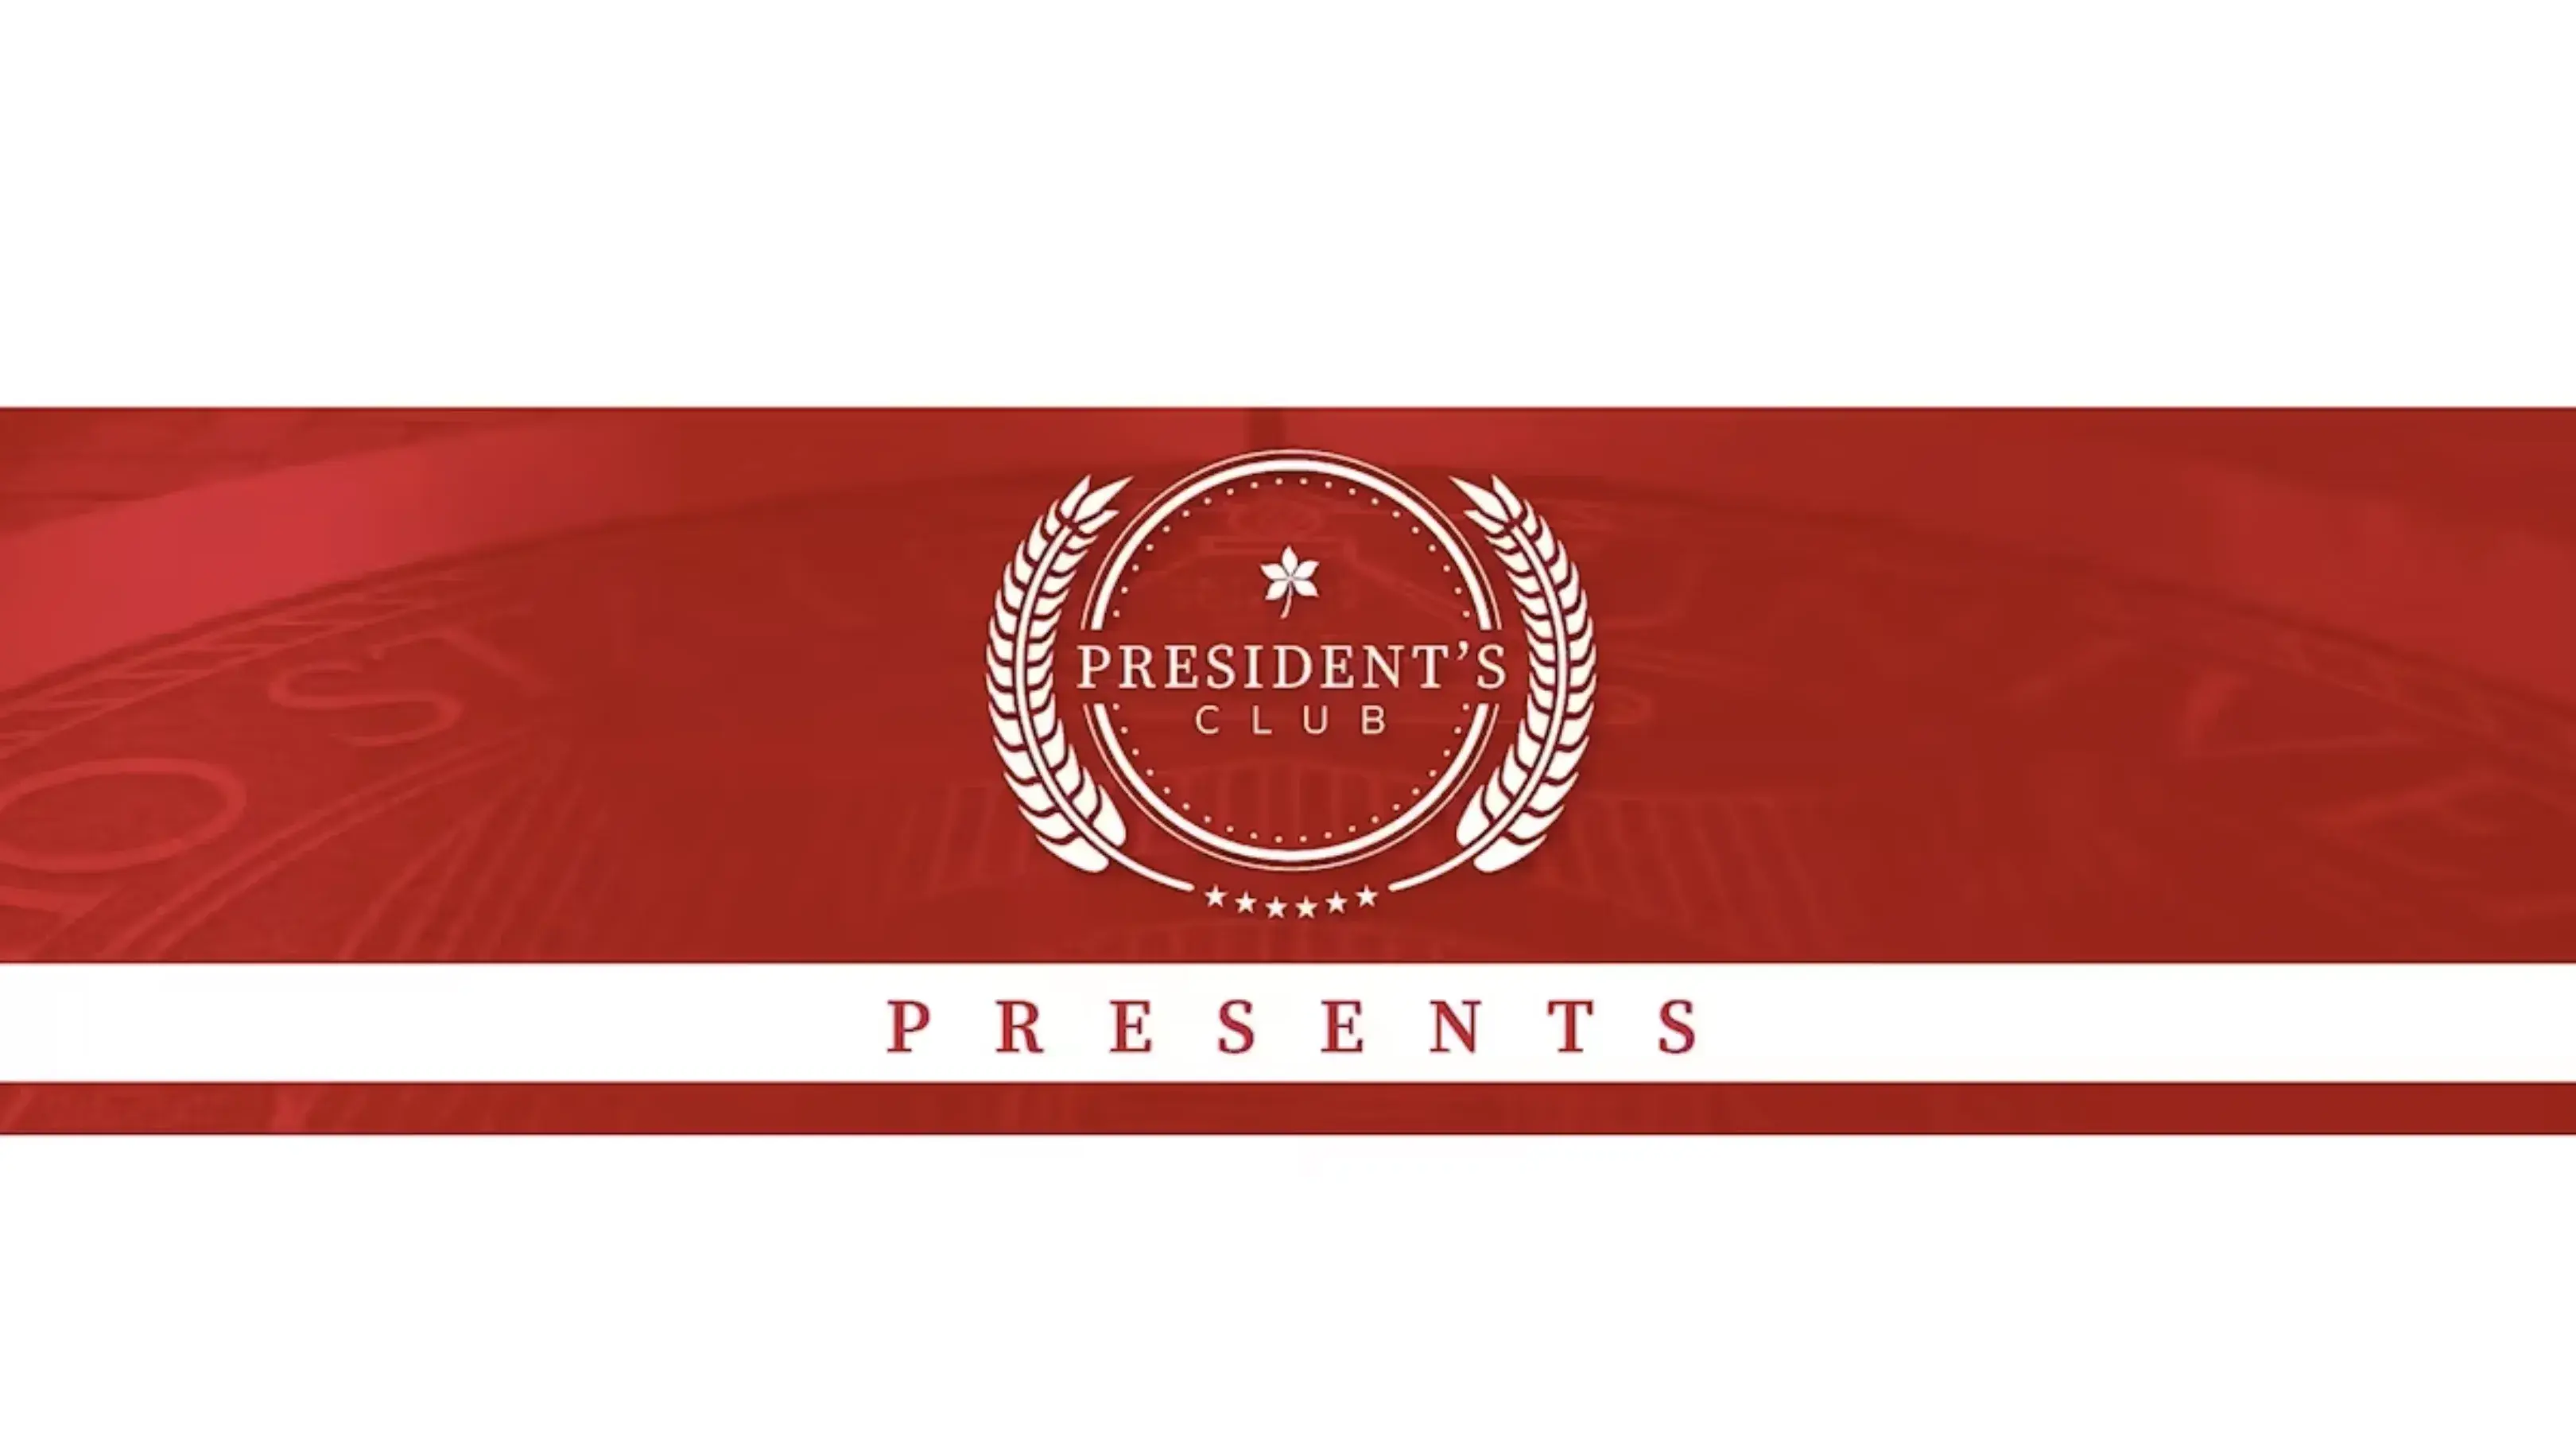 President's Club seal with the subtitle "Presents"